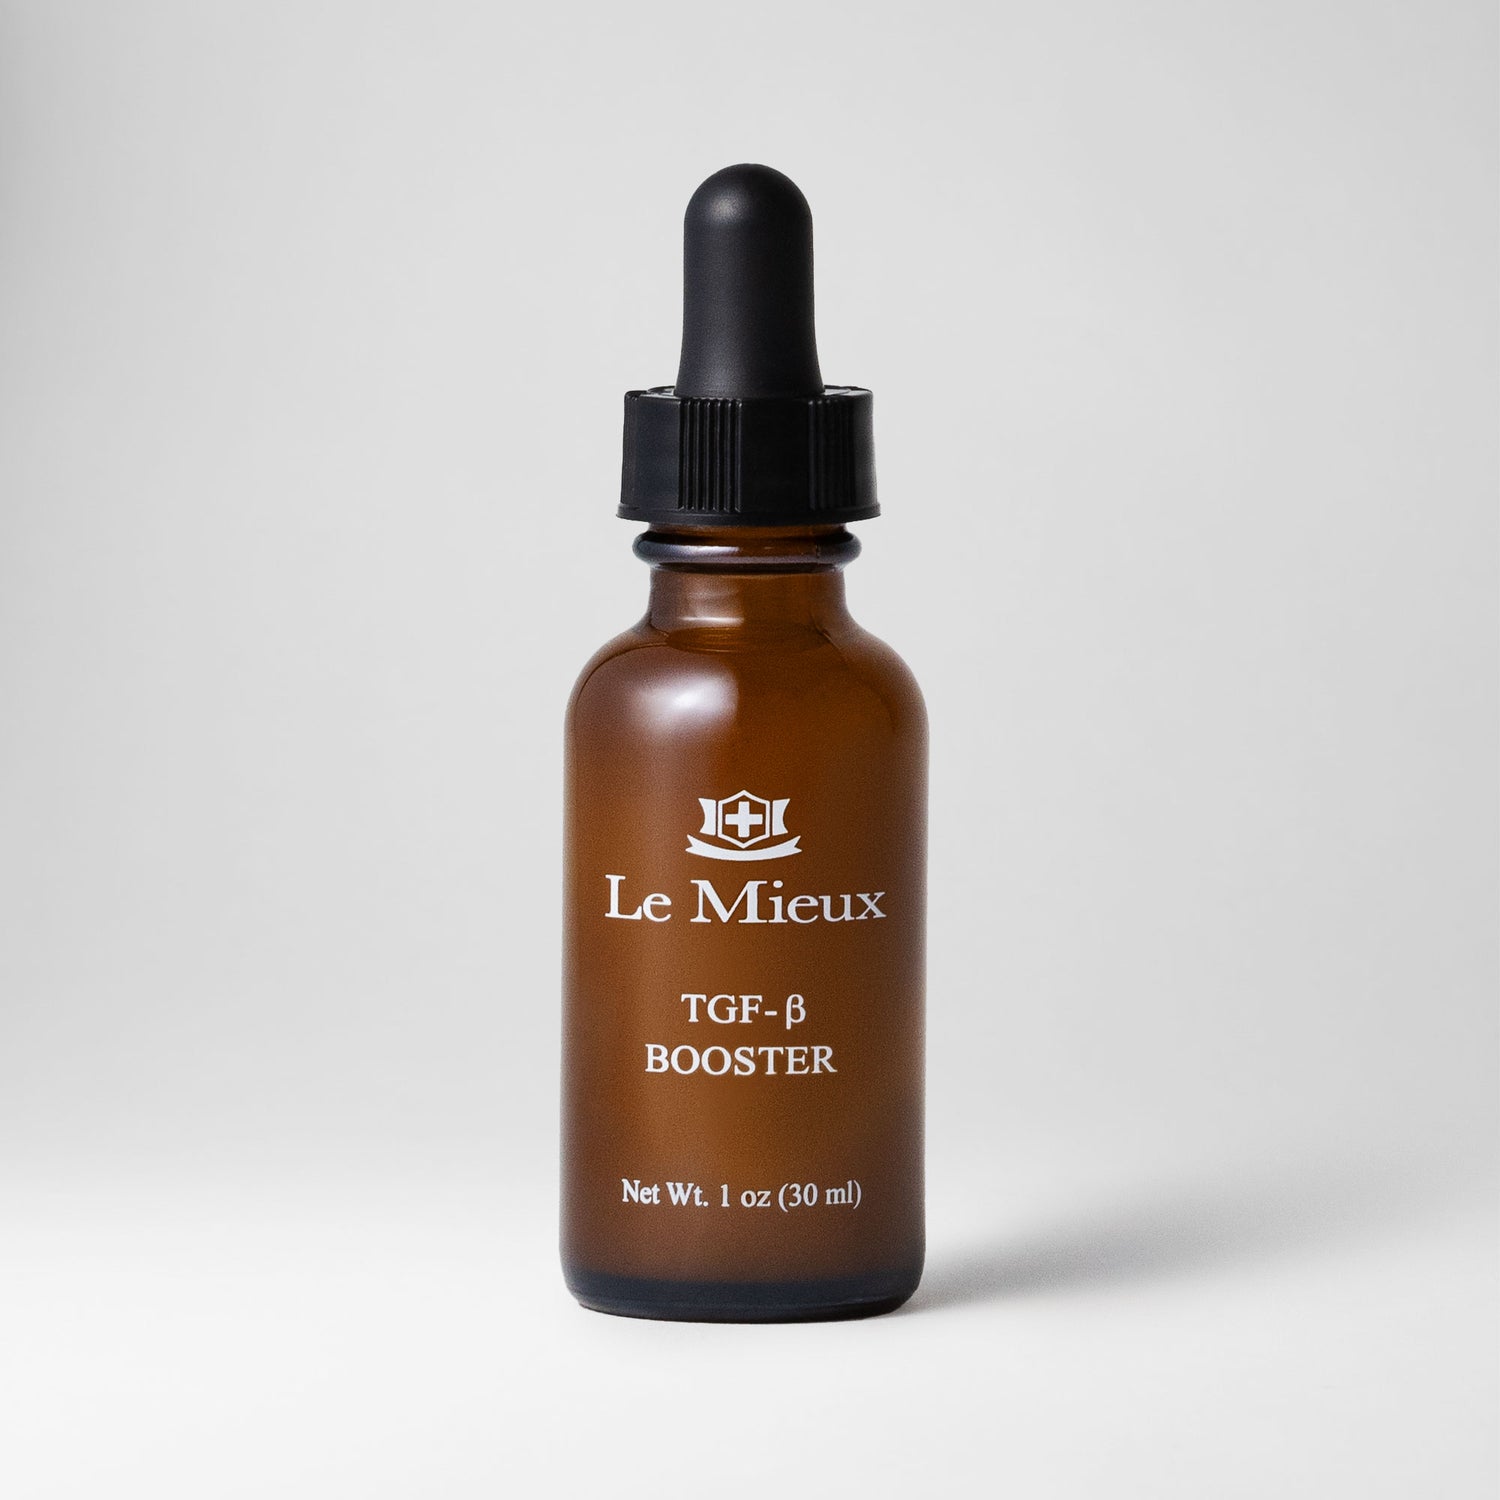  TGF-β BOOSTER from Le Mieux Skincare - featured